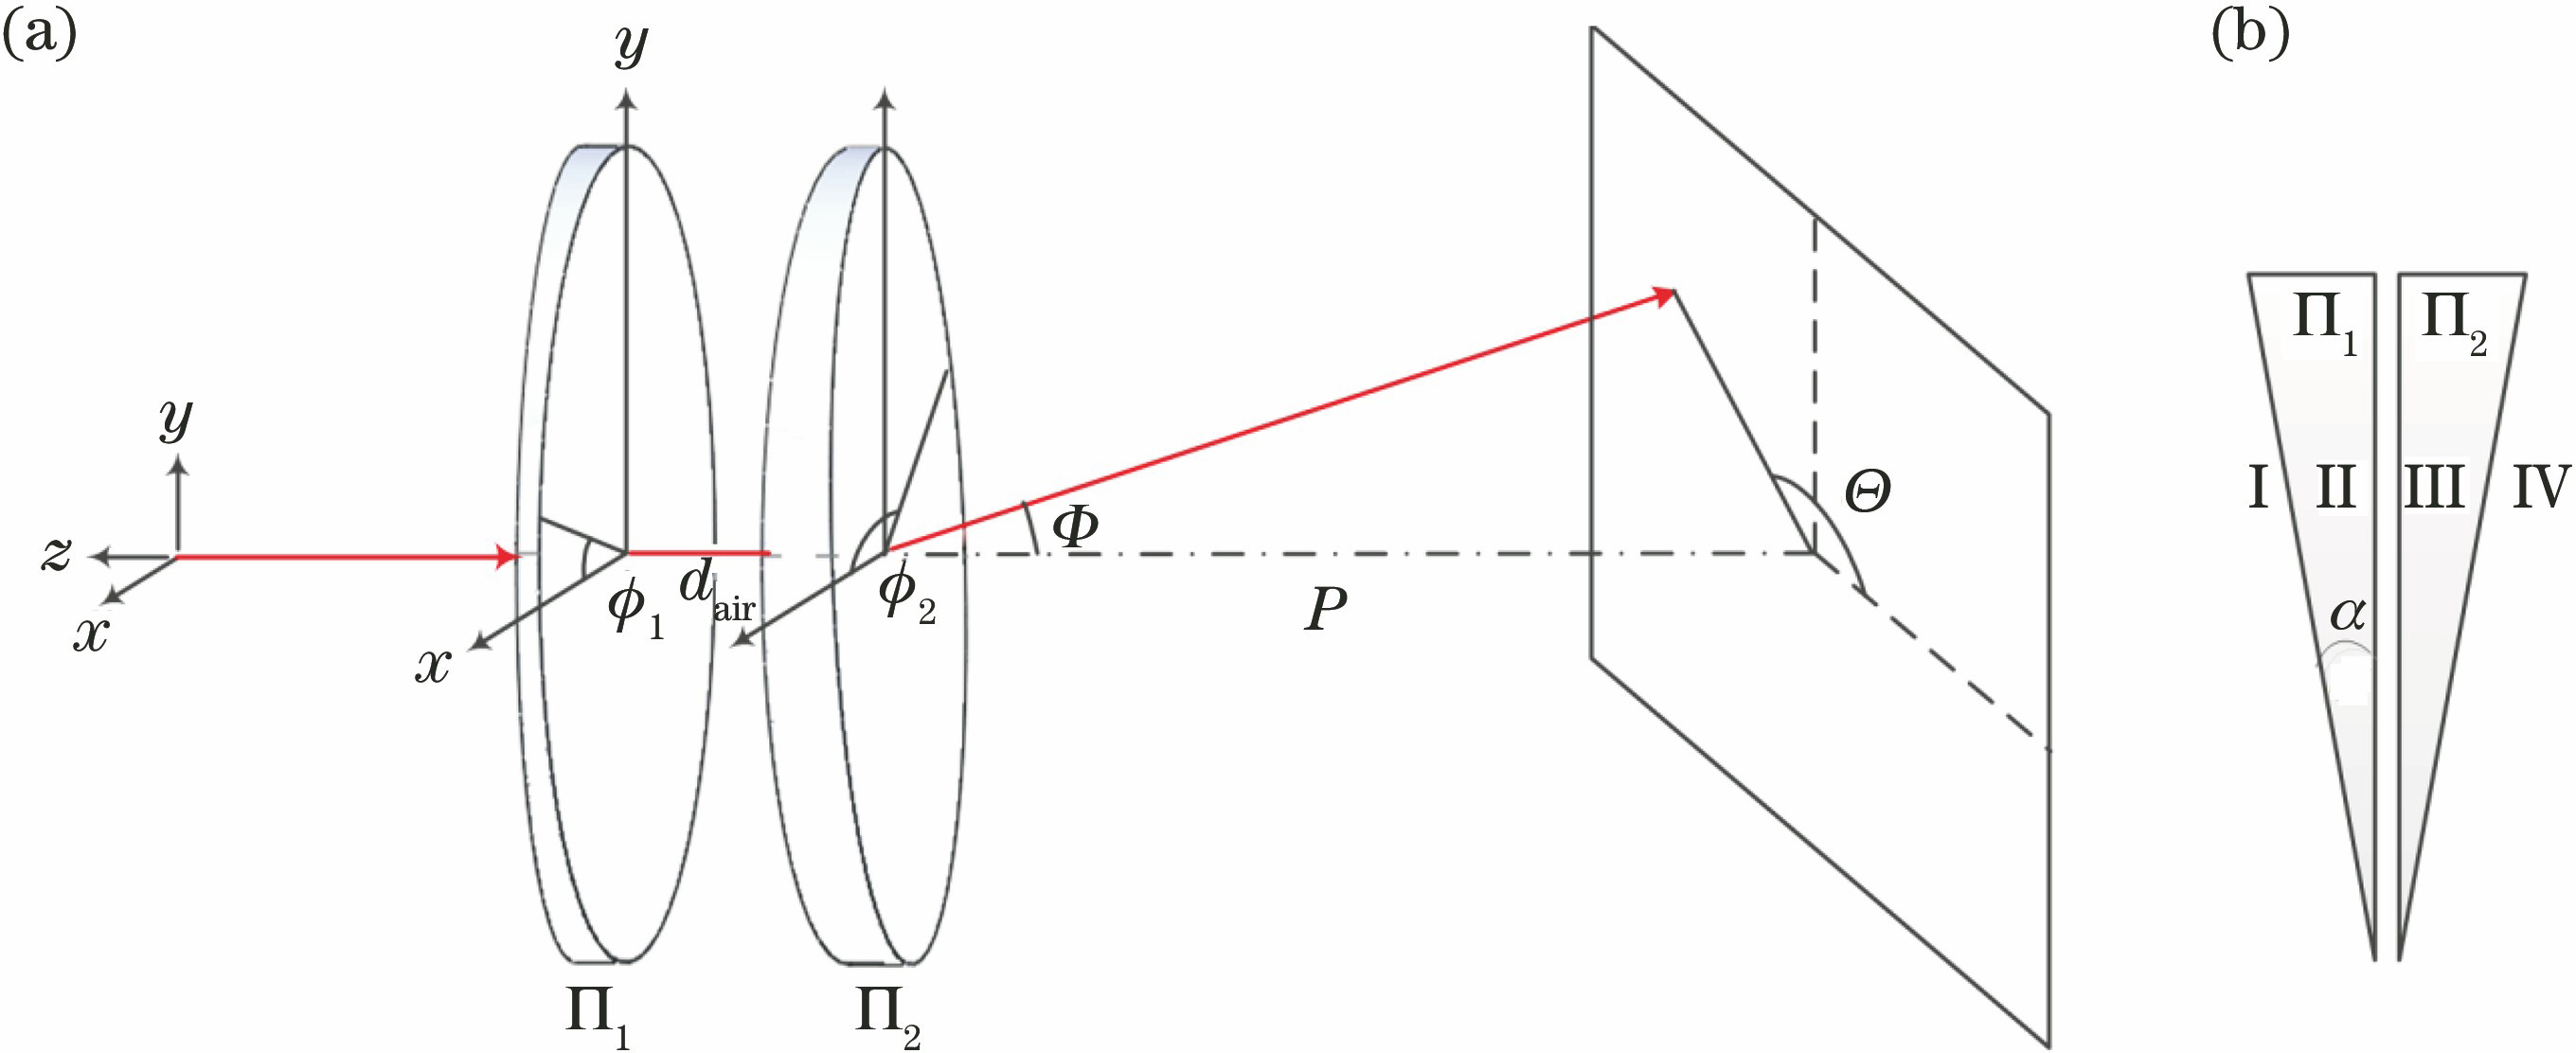 Schematic for rotational-double-prism-based beam steering system. (a) Description of the system parameters; (b) system arrangement